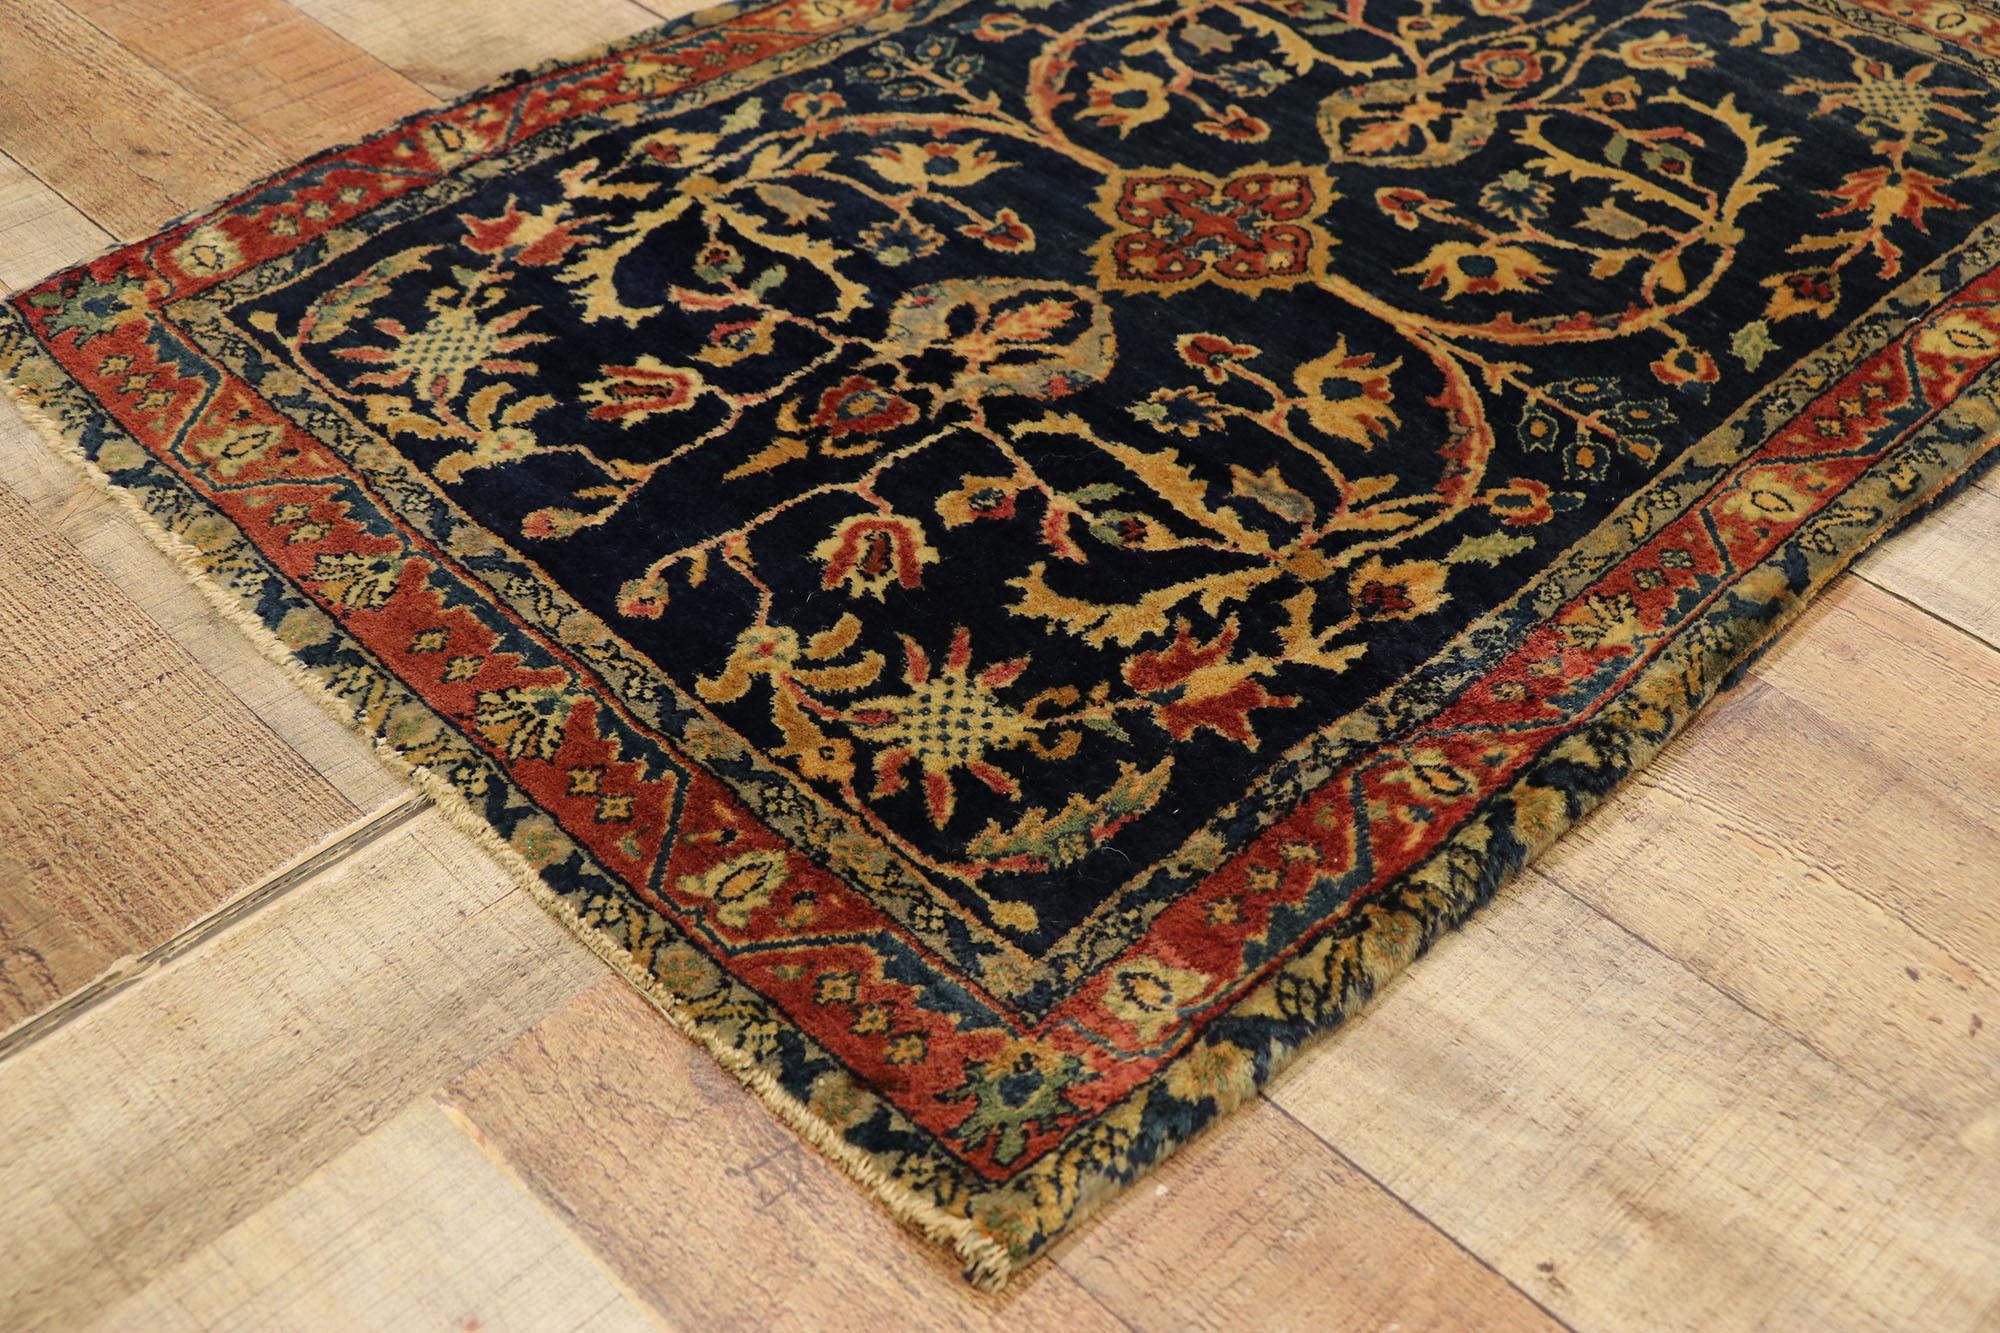 20th Century Antique Persian Mohajeran Sarouk Rug with Federal Style For Sale